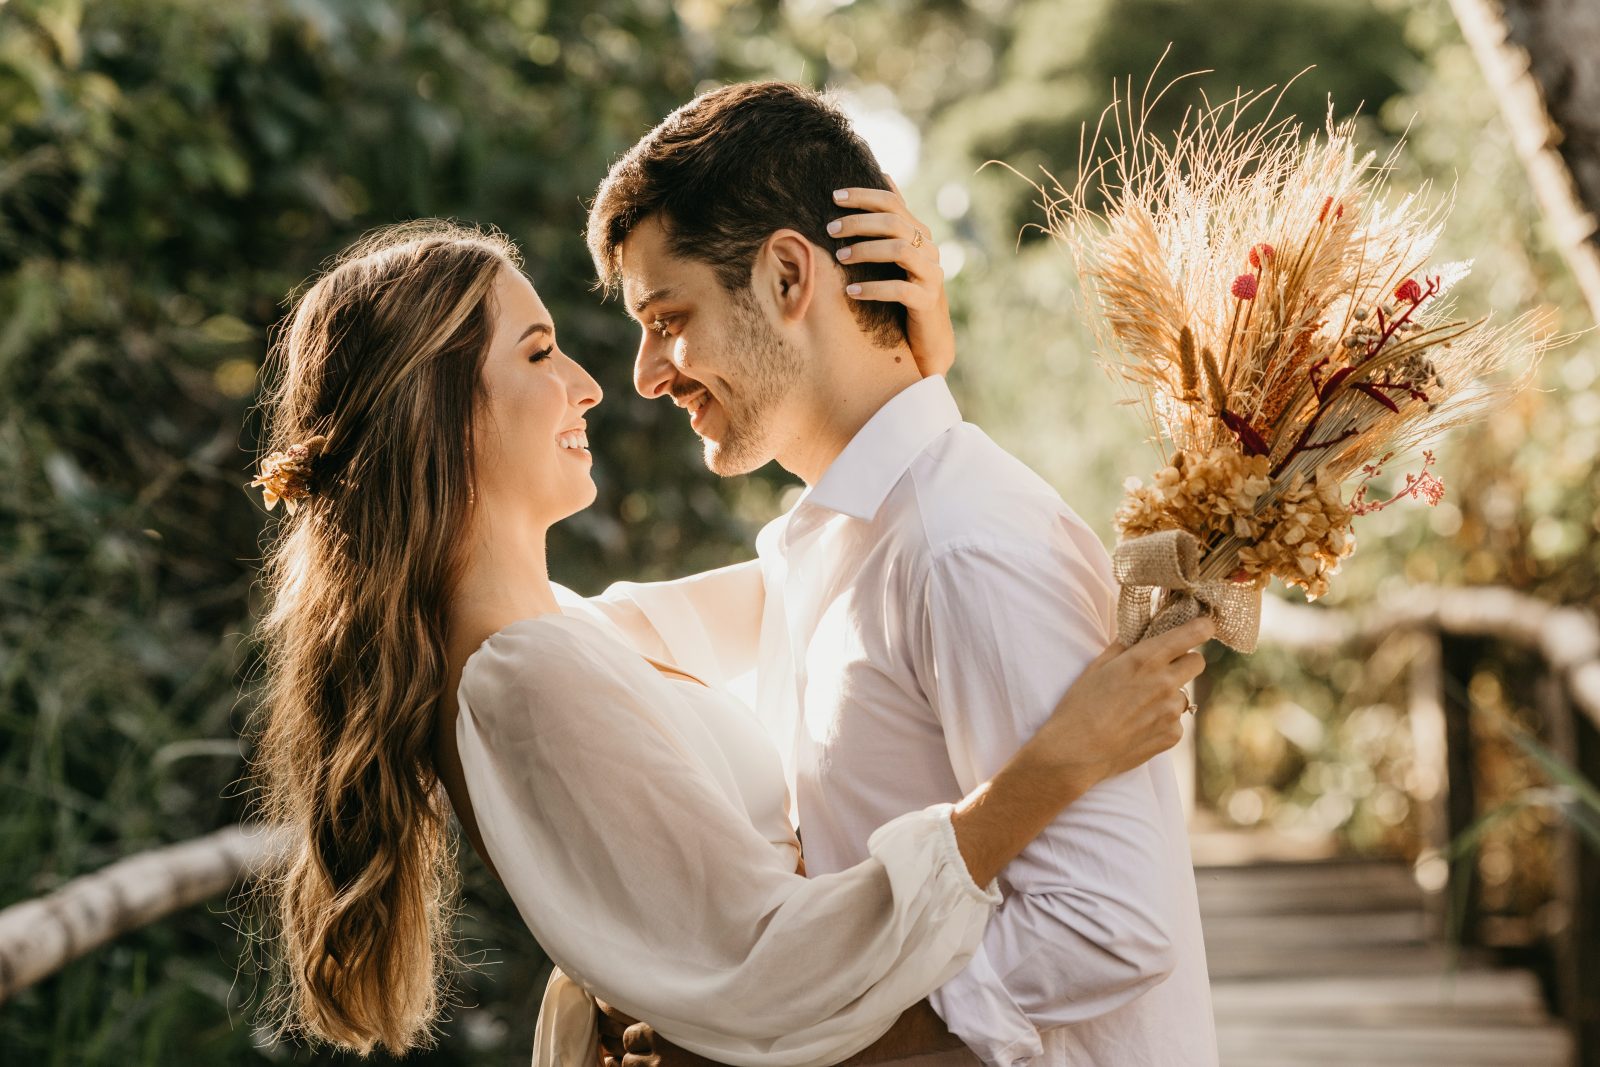 10 Benefits Of Eloping That May Surprise You!